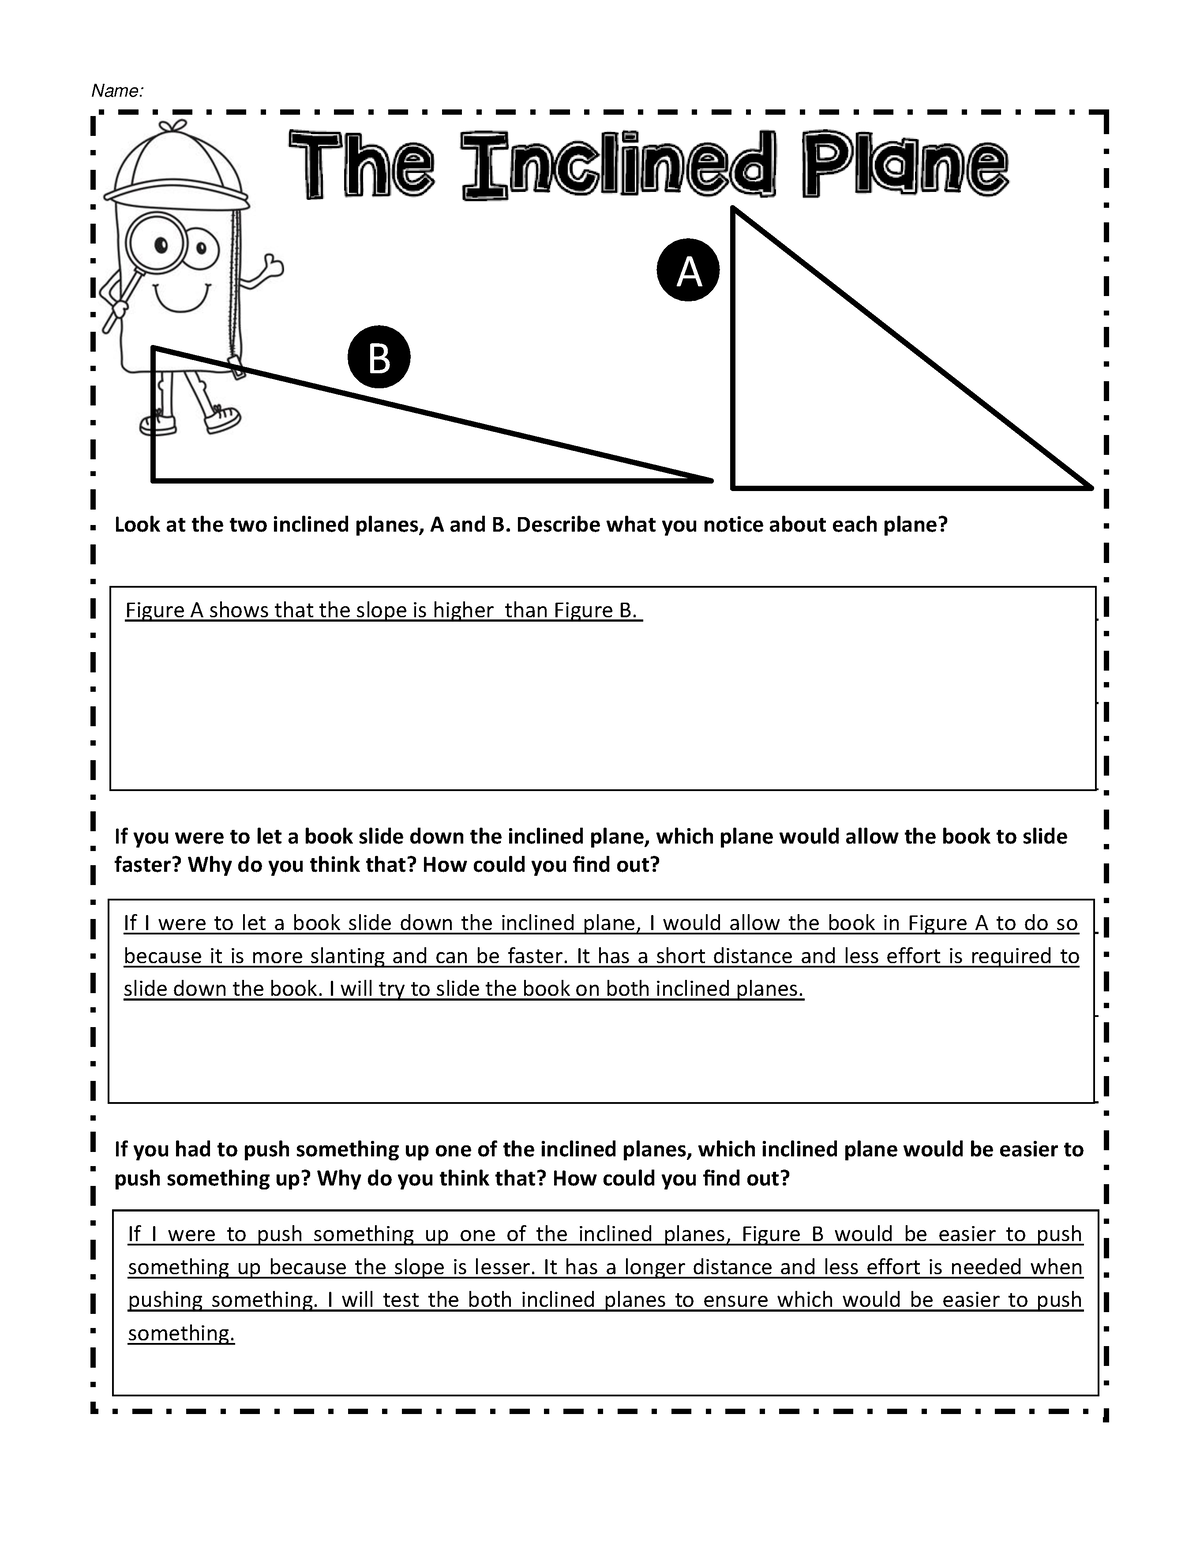 the-inclined-plane-answer-a-b-name-look-at-the-two-inclined-planes-a-and-b-describe-what